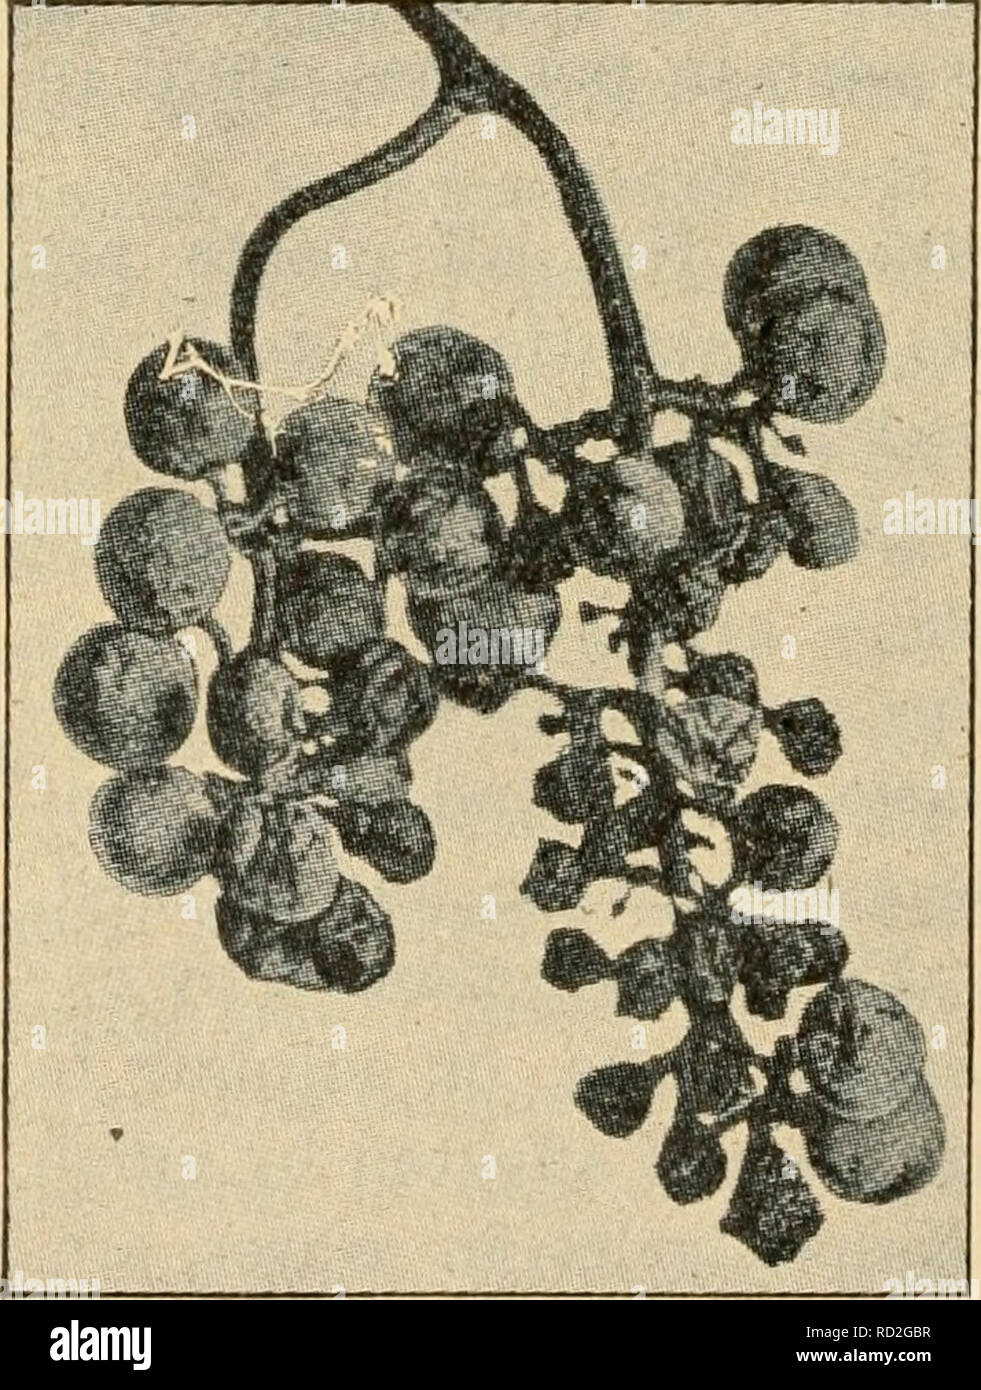 . Elementary principles of agriculture : a text book for the common schools. Agriculture. Fig.91. The &quot;brown rot&quot; of plums and peaches leaves &quot; mummies &quot; on the trees.. Fig. 92. Black rot oi grape may be pre- vented by timely use of Bordeau.^ mi.xture vitriol) known as Bor- deaux mixture (given in the Appendix) is most often used. The plants are sprayed with a very dilute solution, so that a thin film of the poison covers the leaves, stems, buds, and fruit of the plant. Spores on the surface of thoroughly sprayed plants are killed, as likewise others that fall on the plants Stock Photo